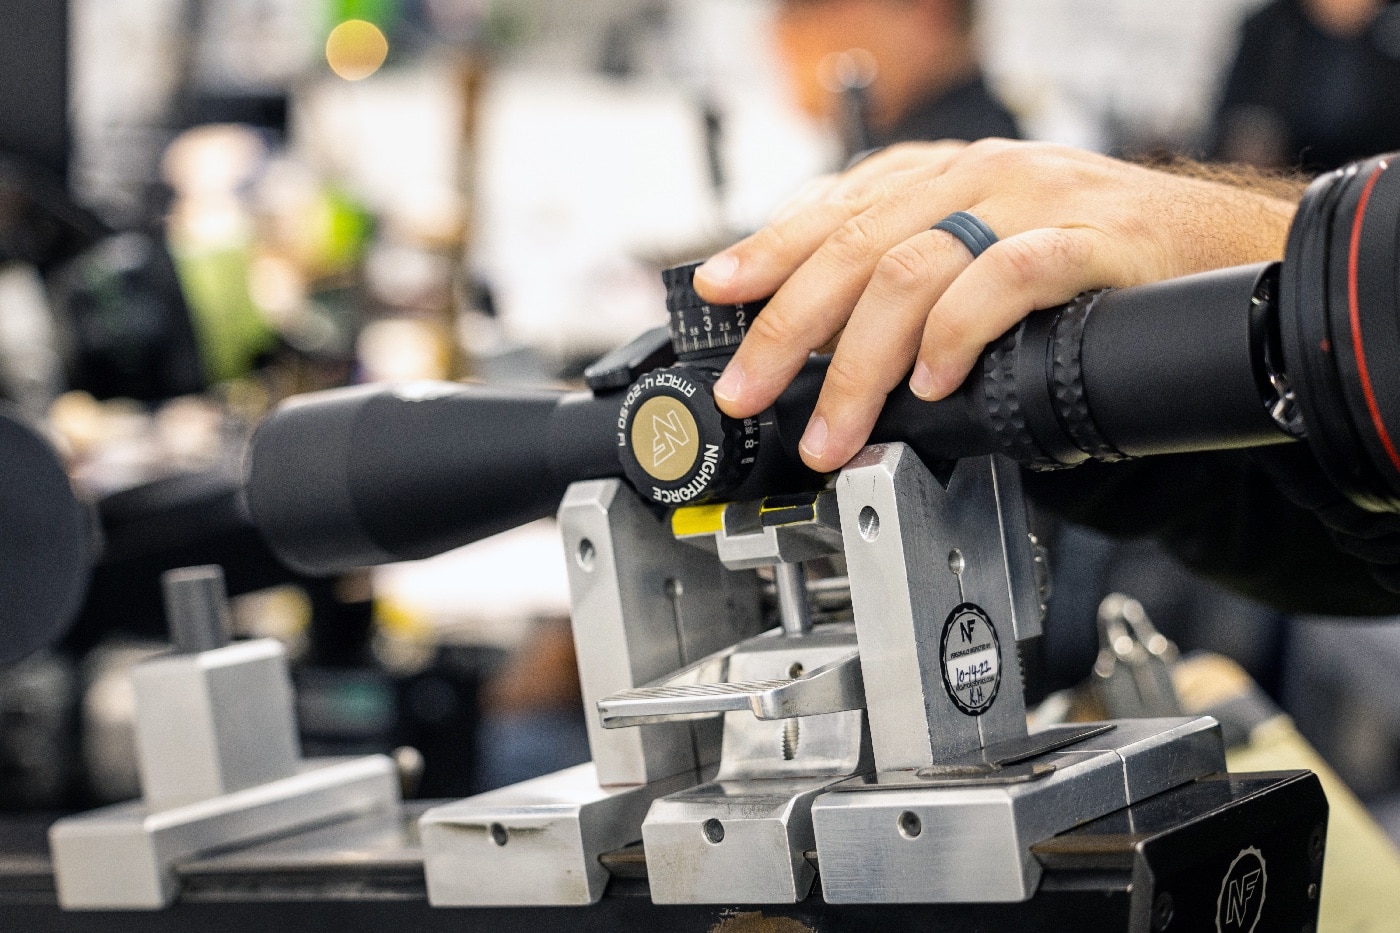 In this photograph, we see a Nightforce Optics employee completing the assembly of a rifle scope.